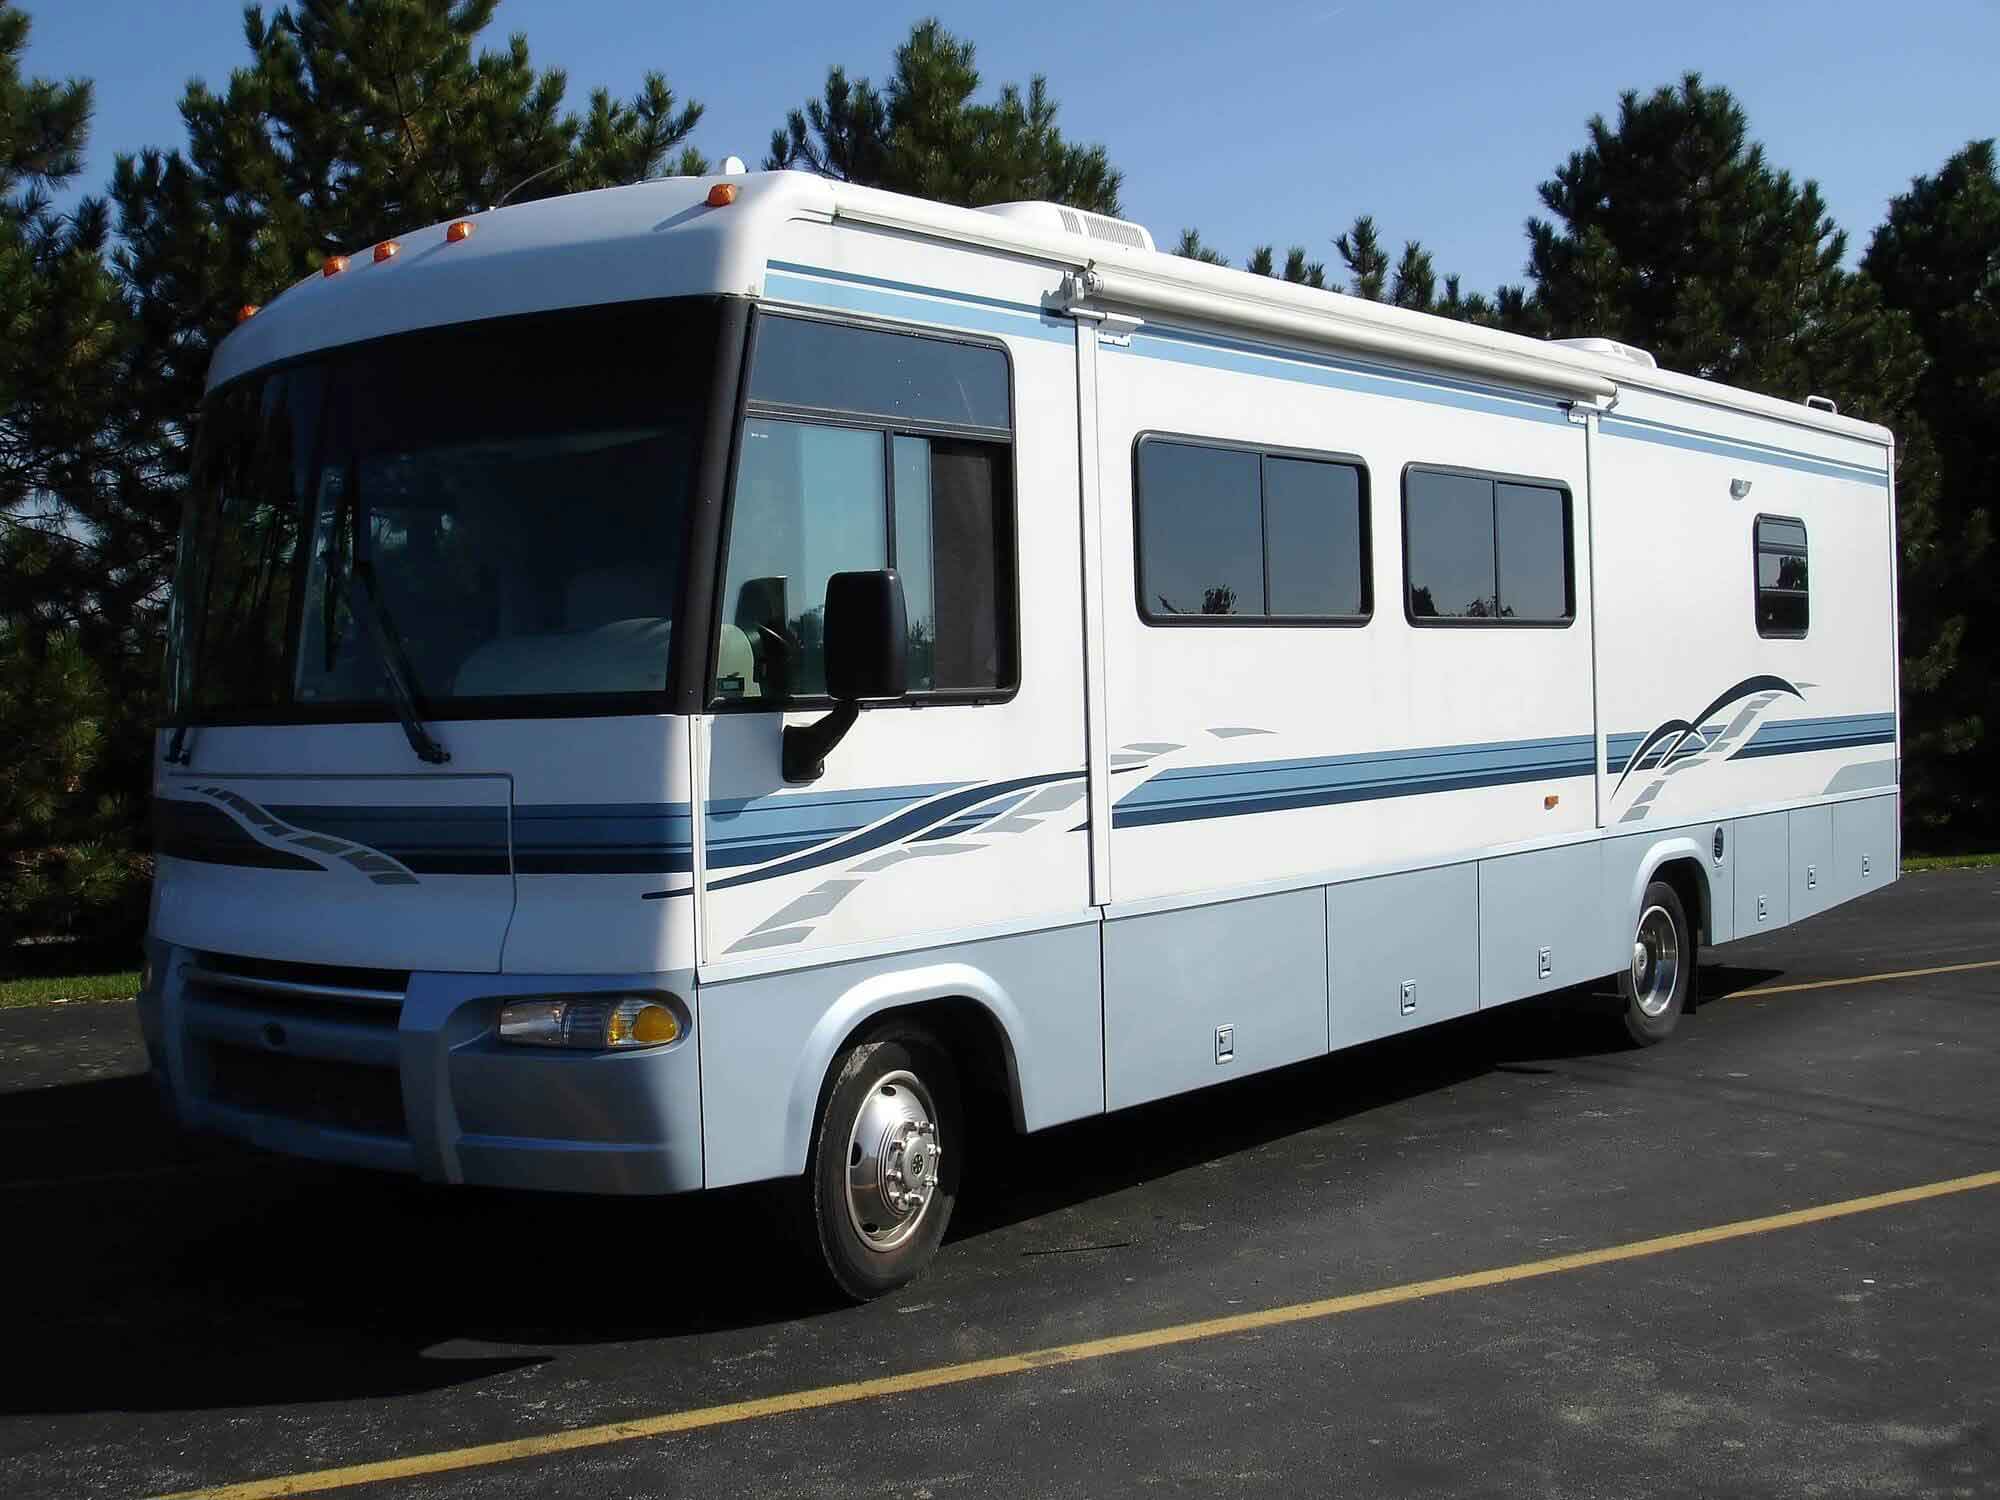 Motorcoach Rentals: Charter, Tour, and Shuttle Buses